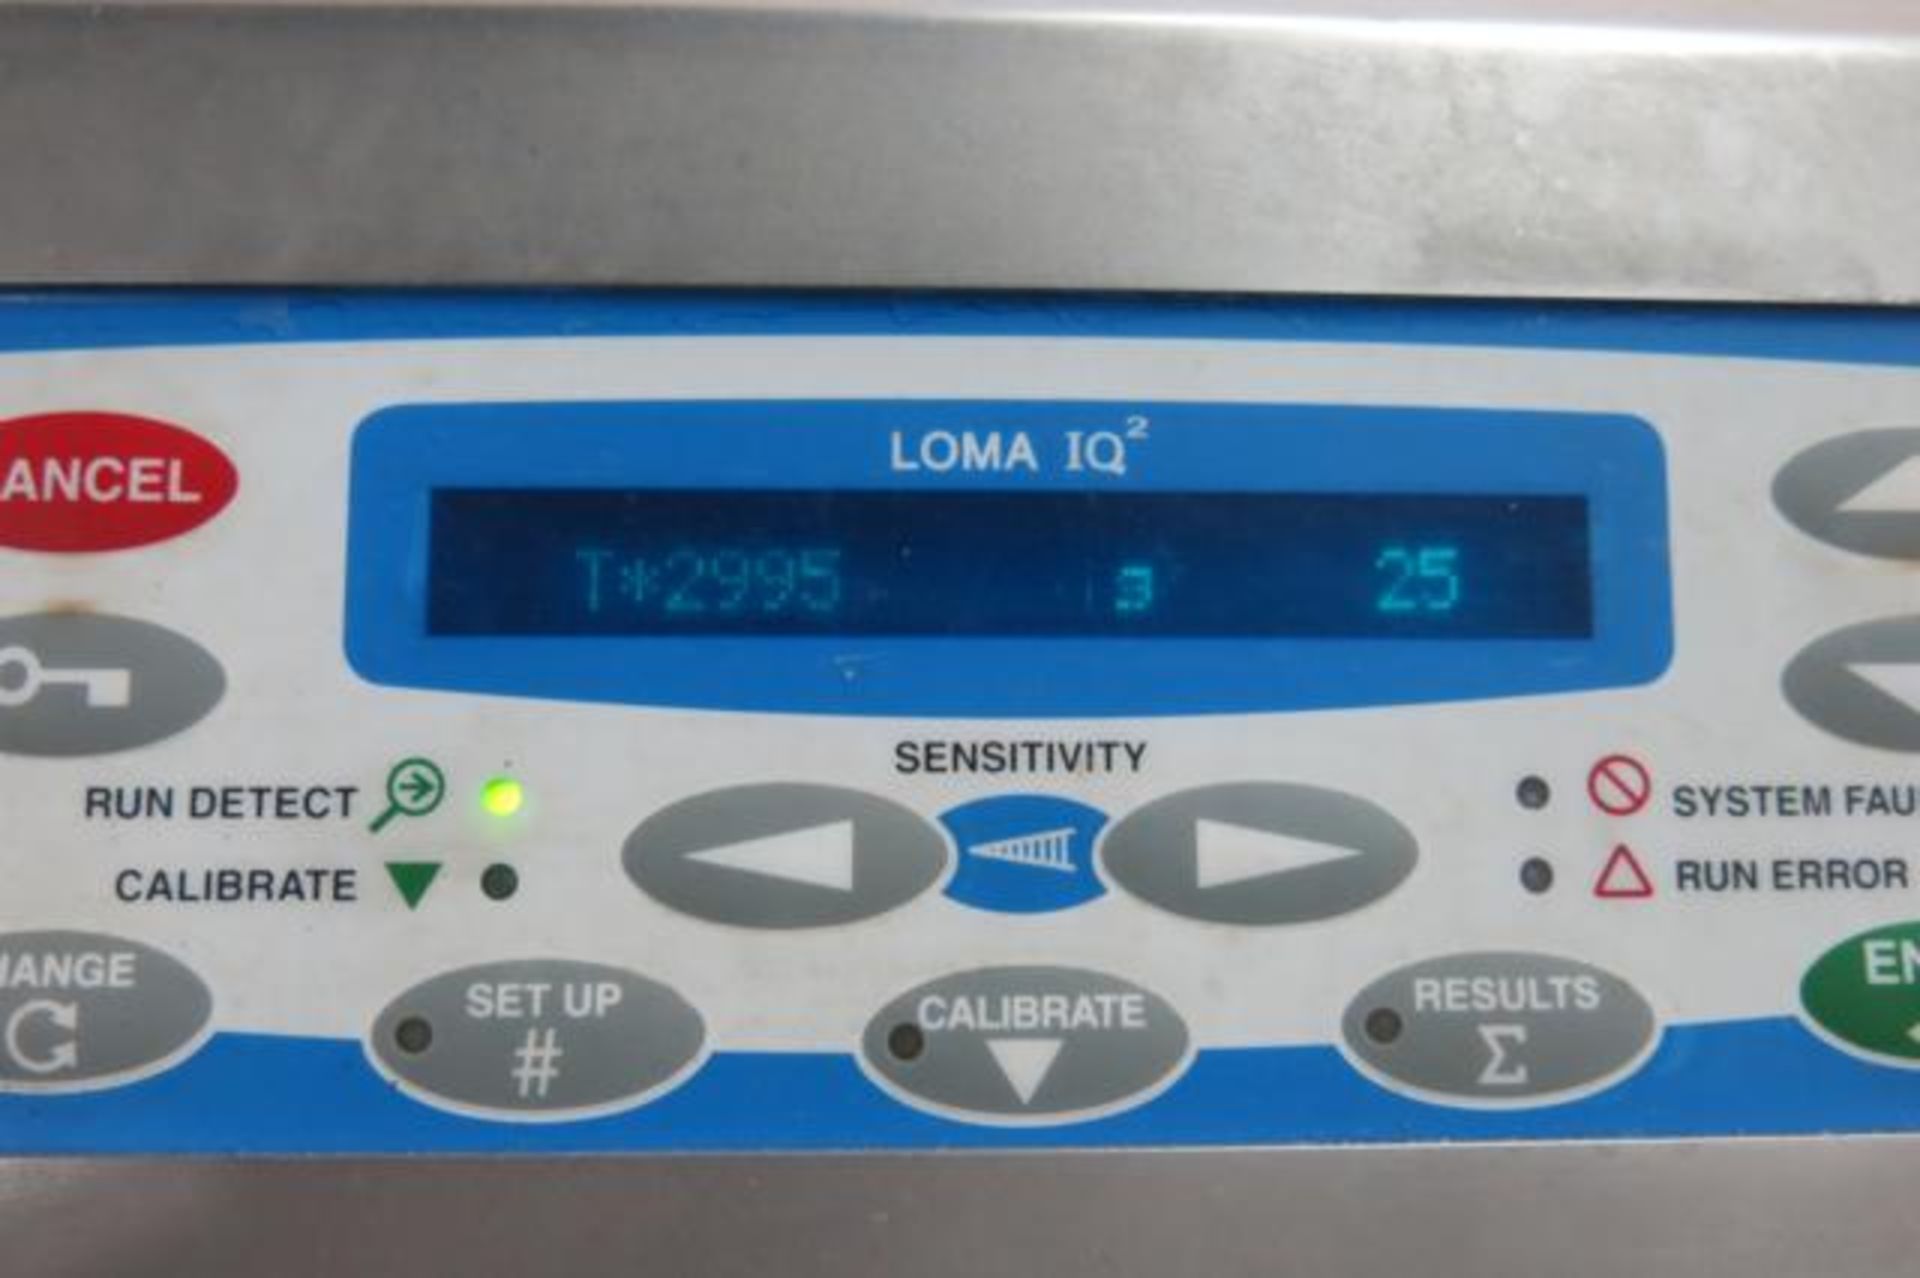 LOMA, IQ2, STAINLESS STEEL, PIPELINE, METAL DETECTOR, 4", 2003, S/N QP12033 - Image 10 of 11